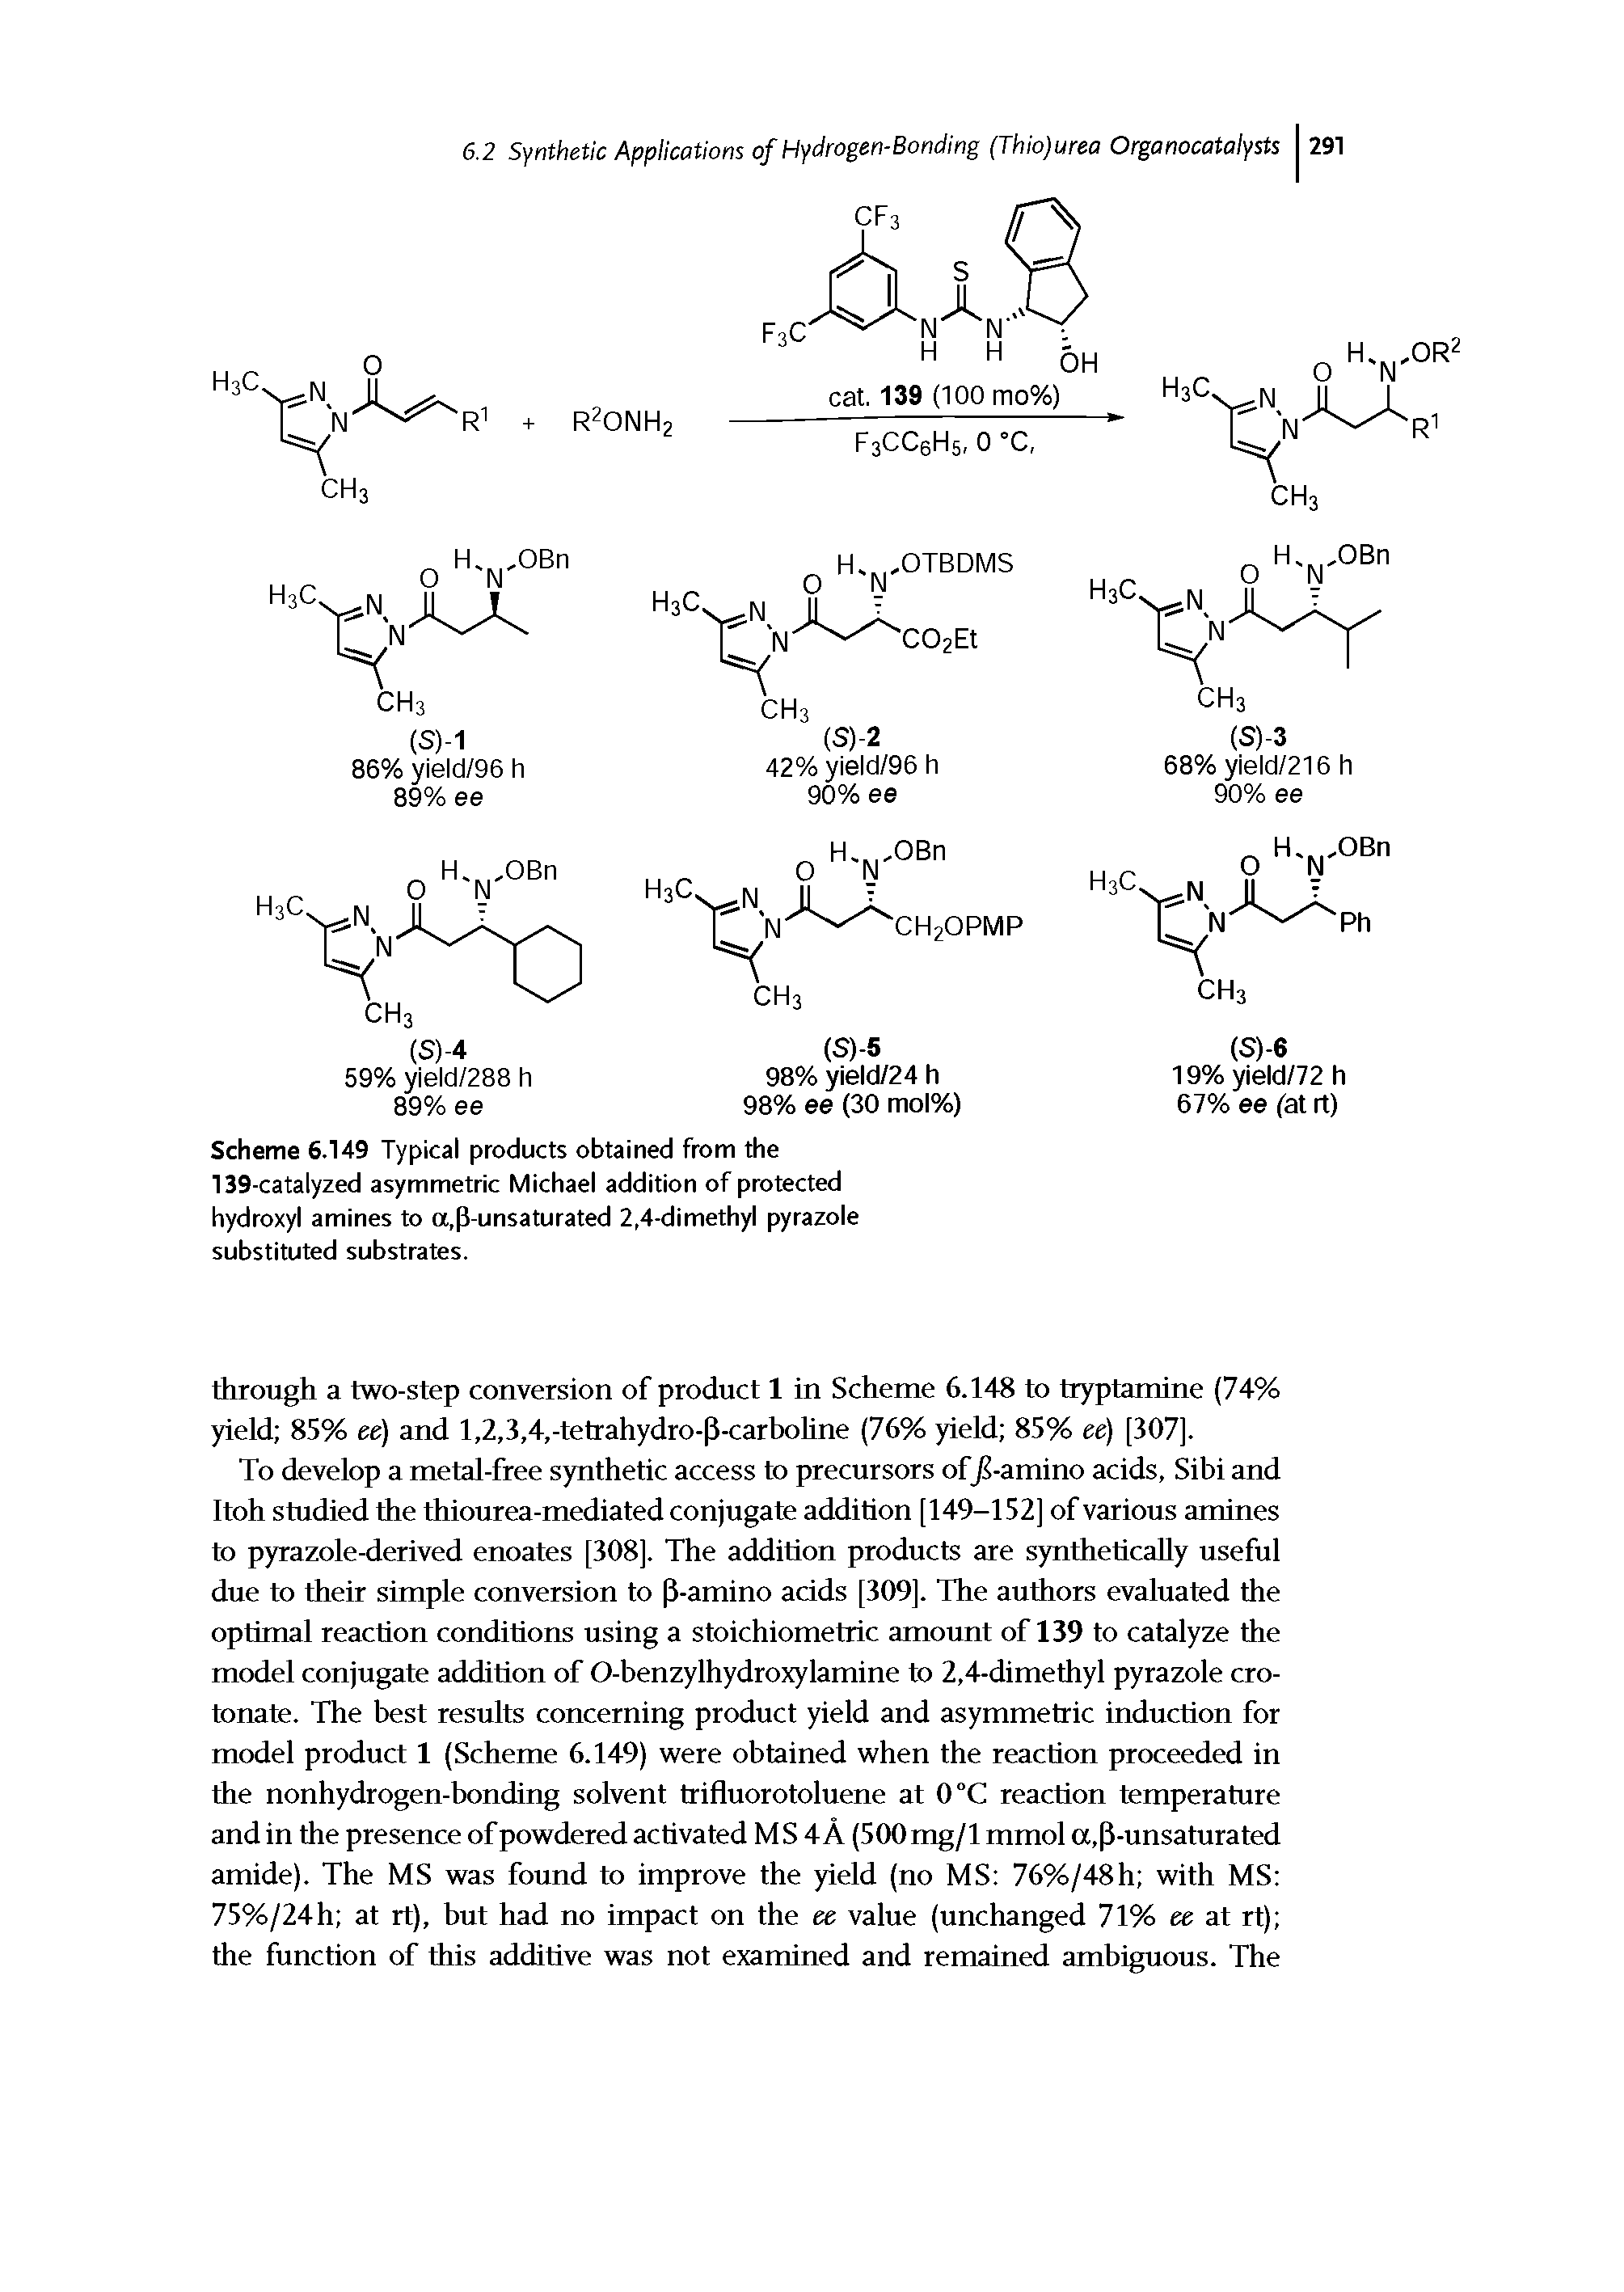 Scheme 6.149 Typical products obtained from the 139-catalyzed asymmetric Michael addition of protected hydroxyl amines to a,P-unsaturated 2,4-dimethyl pyrazole substituted substrates.